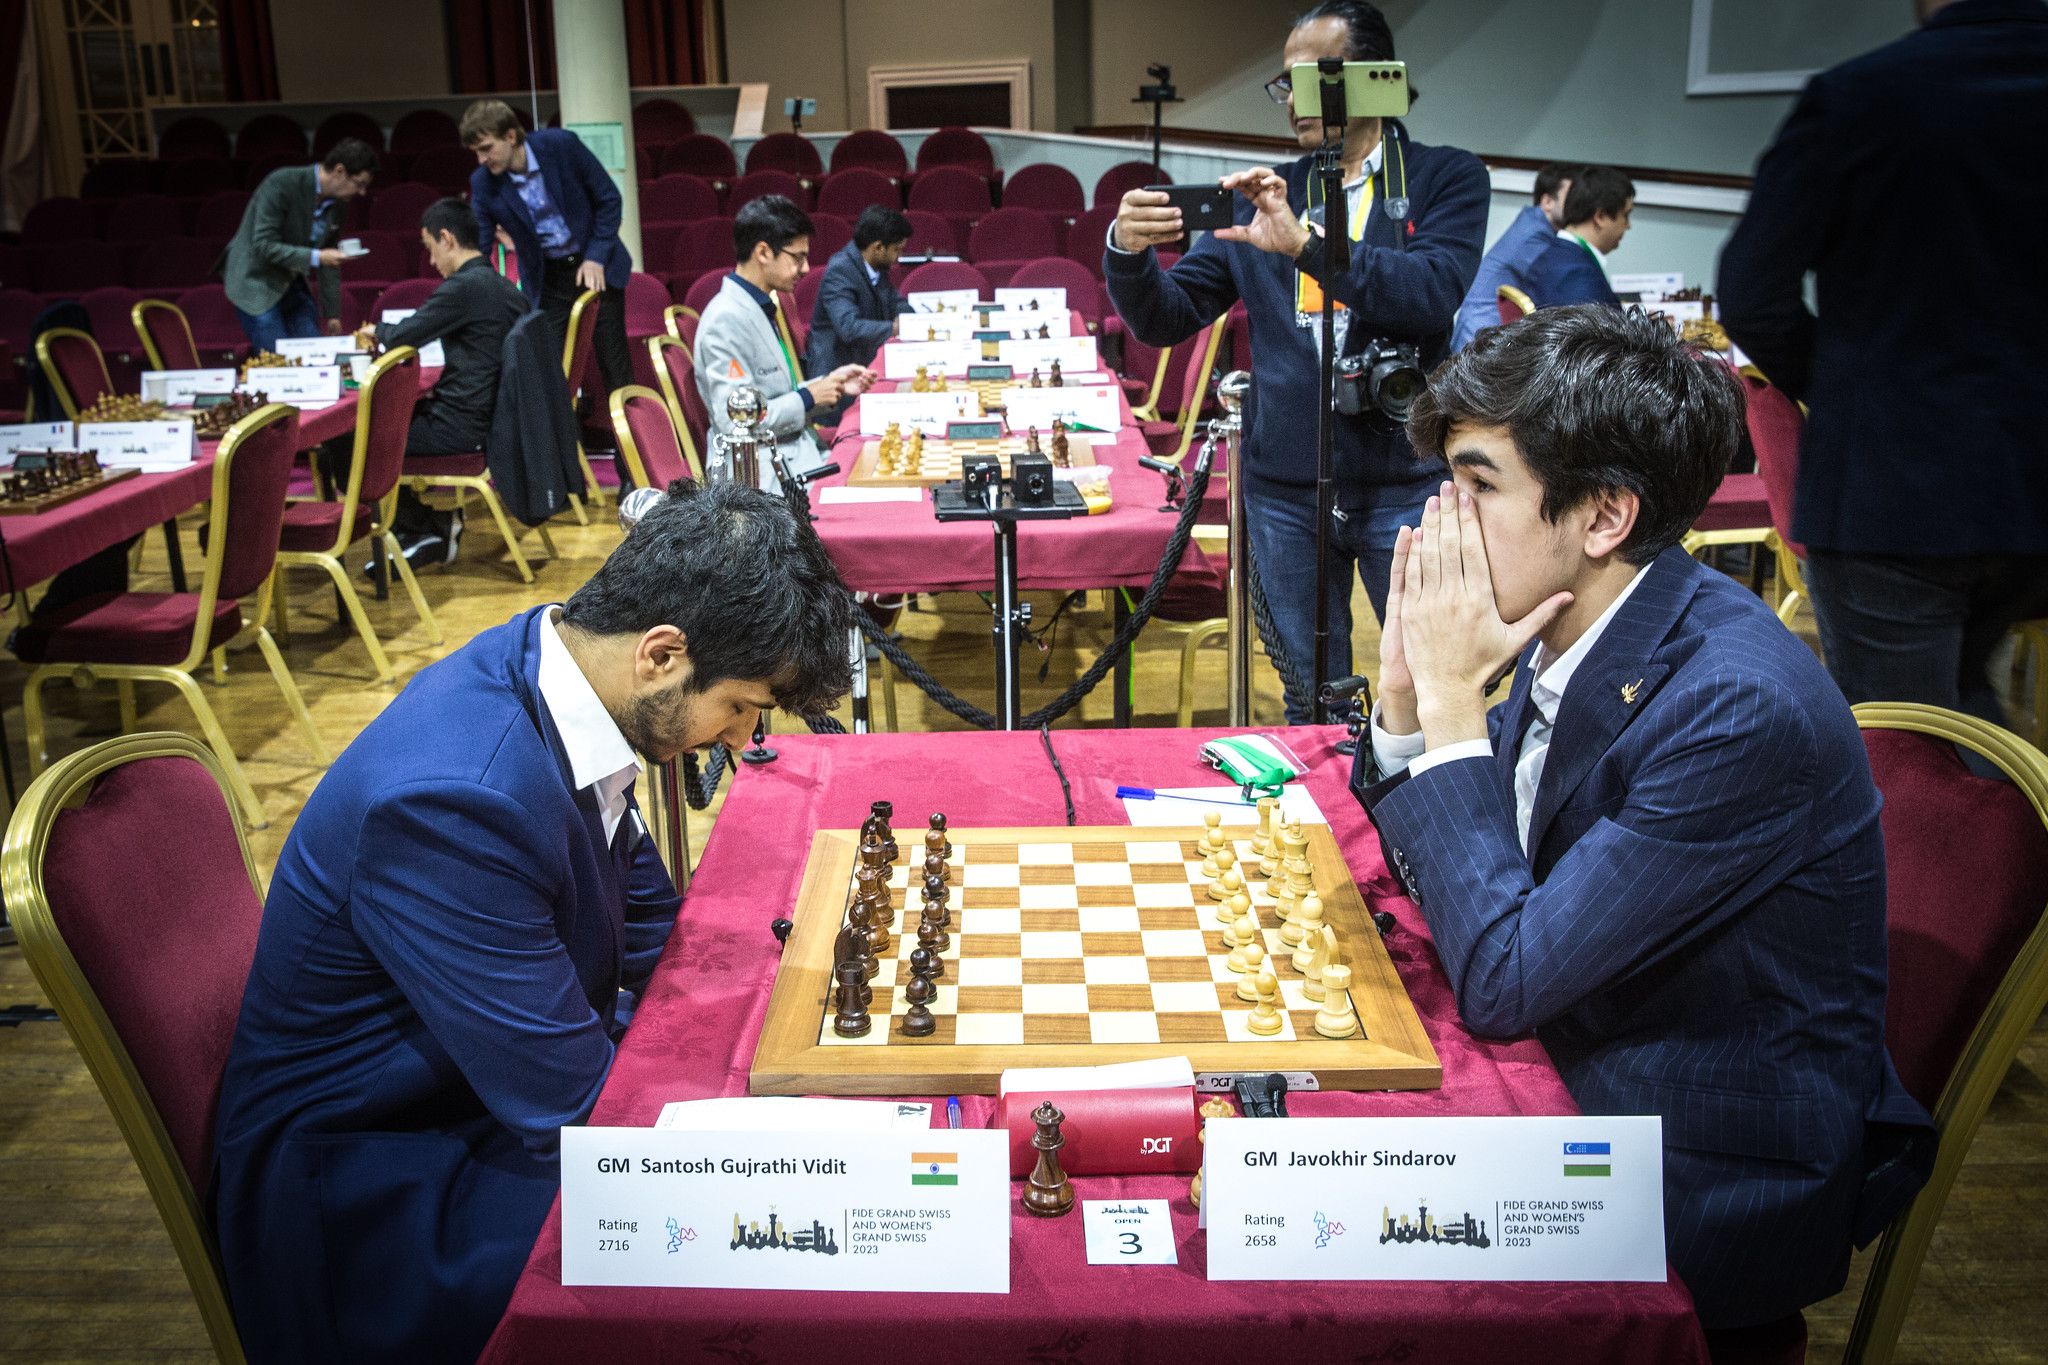 The round 7 of the Fide Grand Swiss will feature a clash between